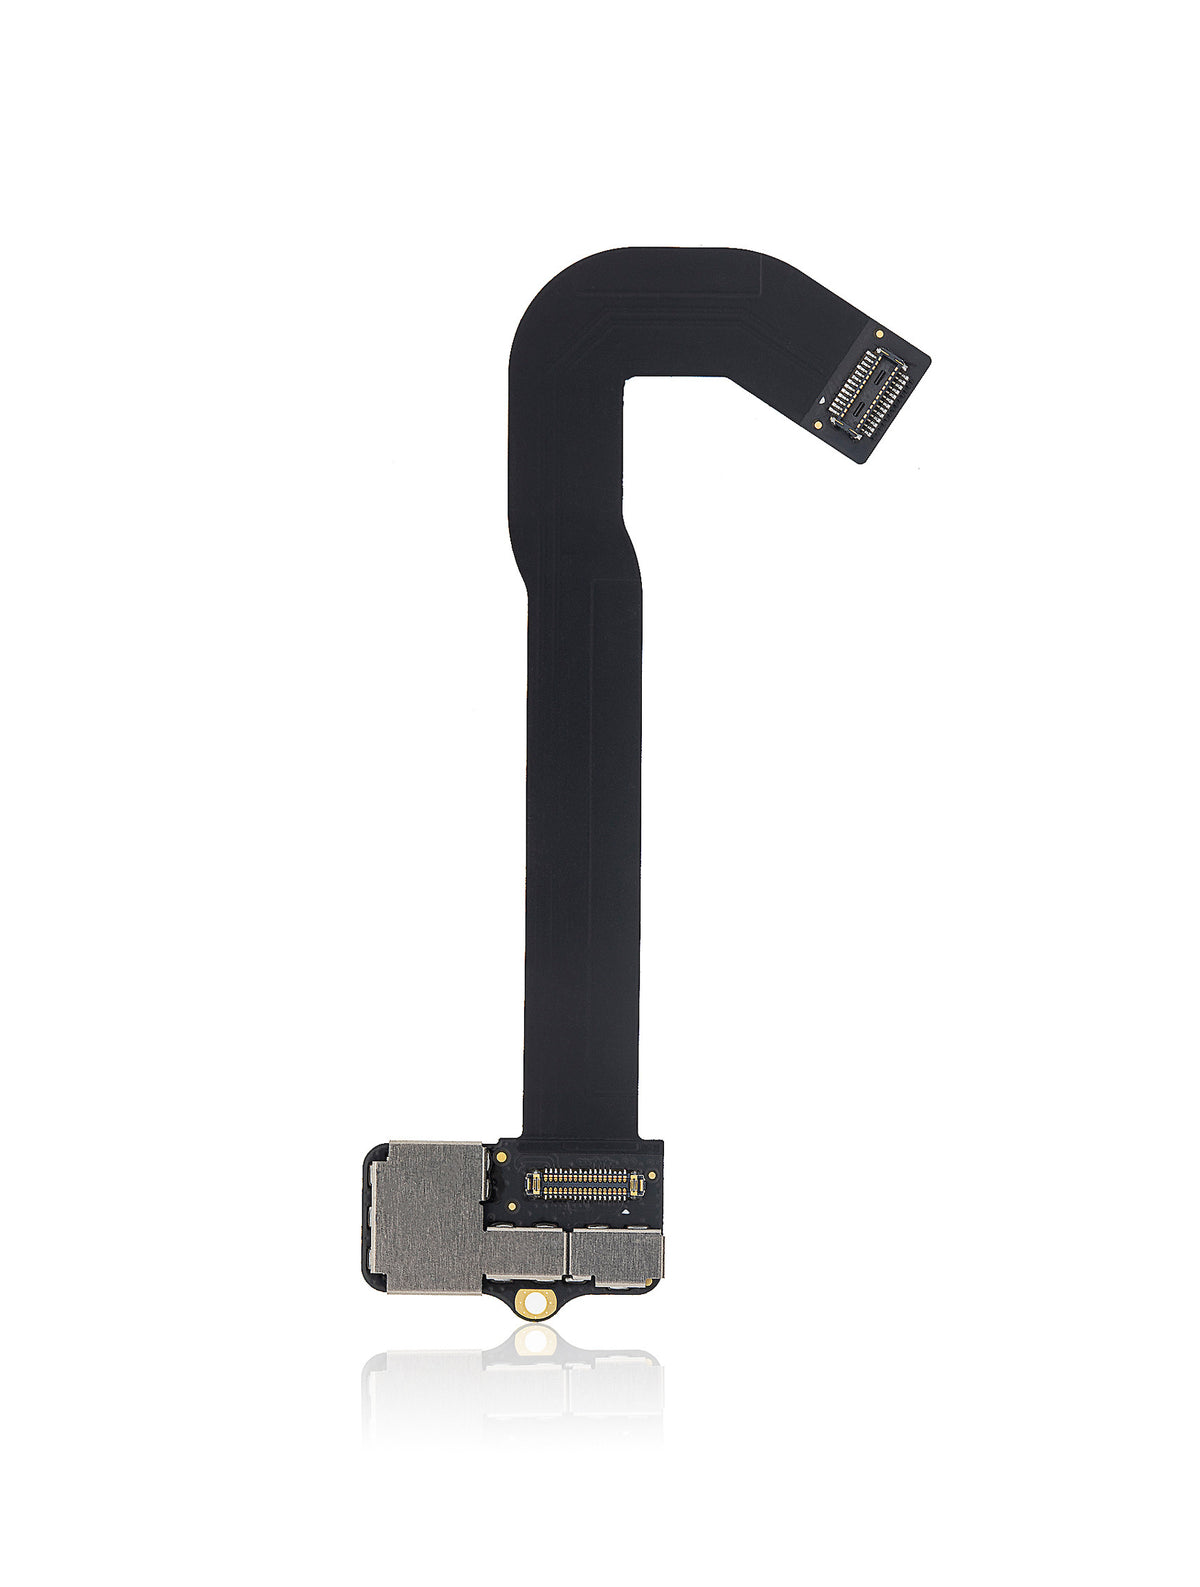 TOUCH BAR FLEX CABLE ONLY FOR MACBOOK PRO 13" A1706 (LATE 2016/MID 2017) A1989 (LATE 2018/EARLY 2019)